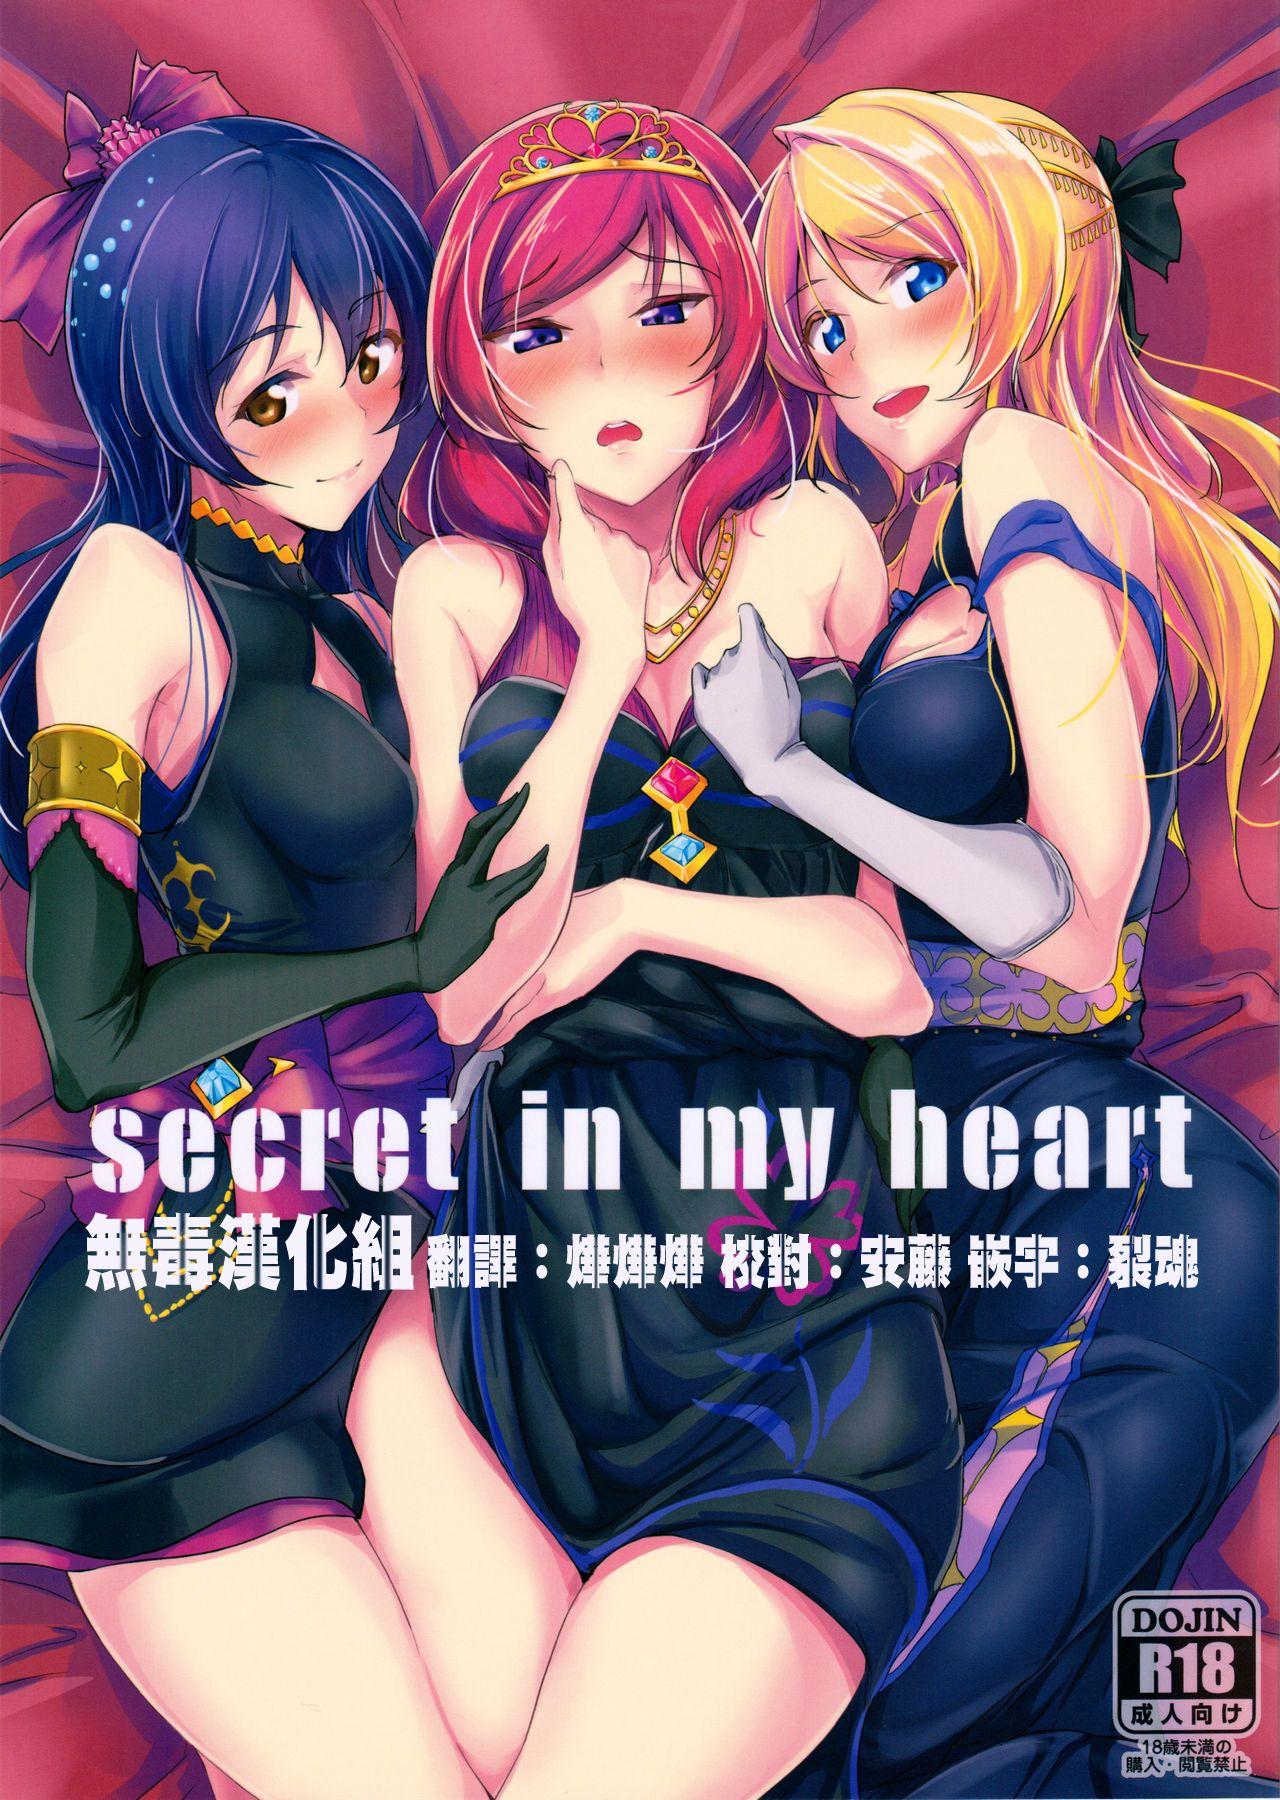 Stepson secret in my heart - Love live Ejaculation - Page 1